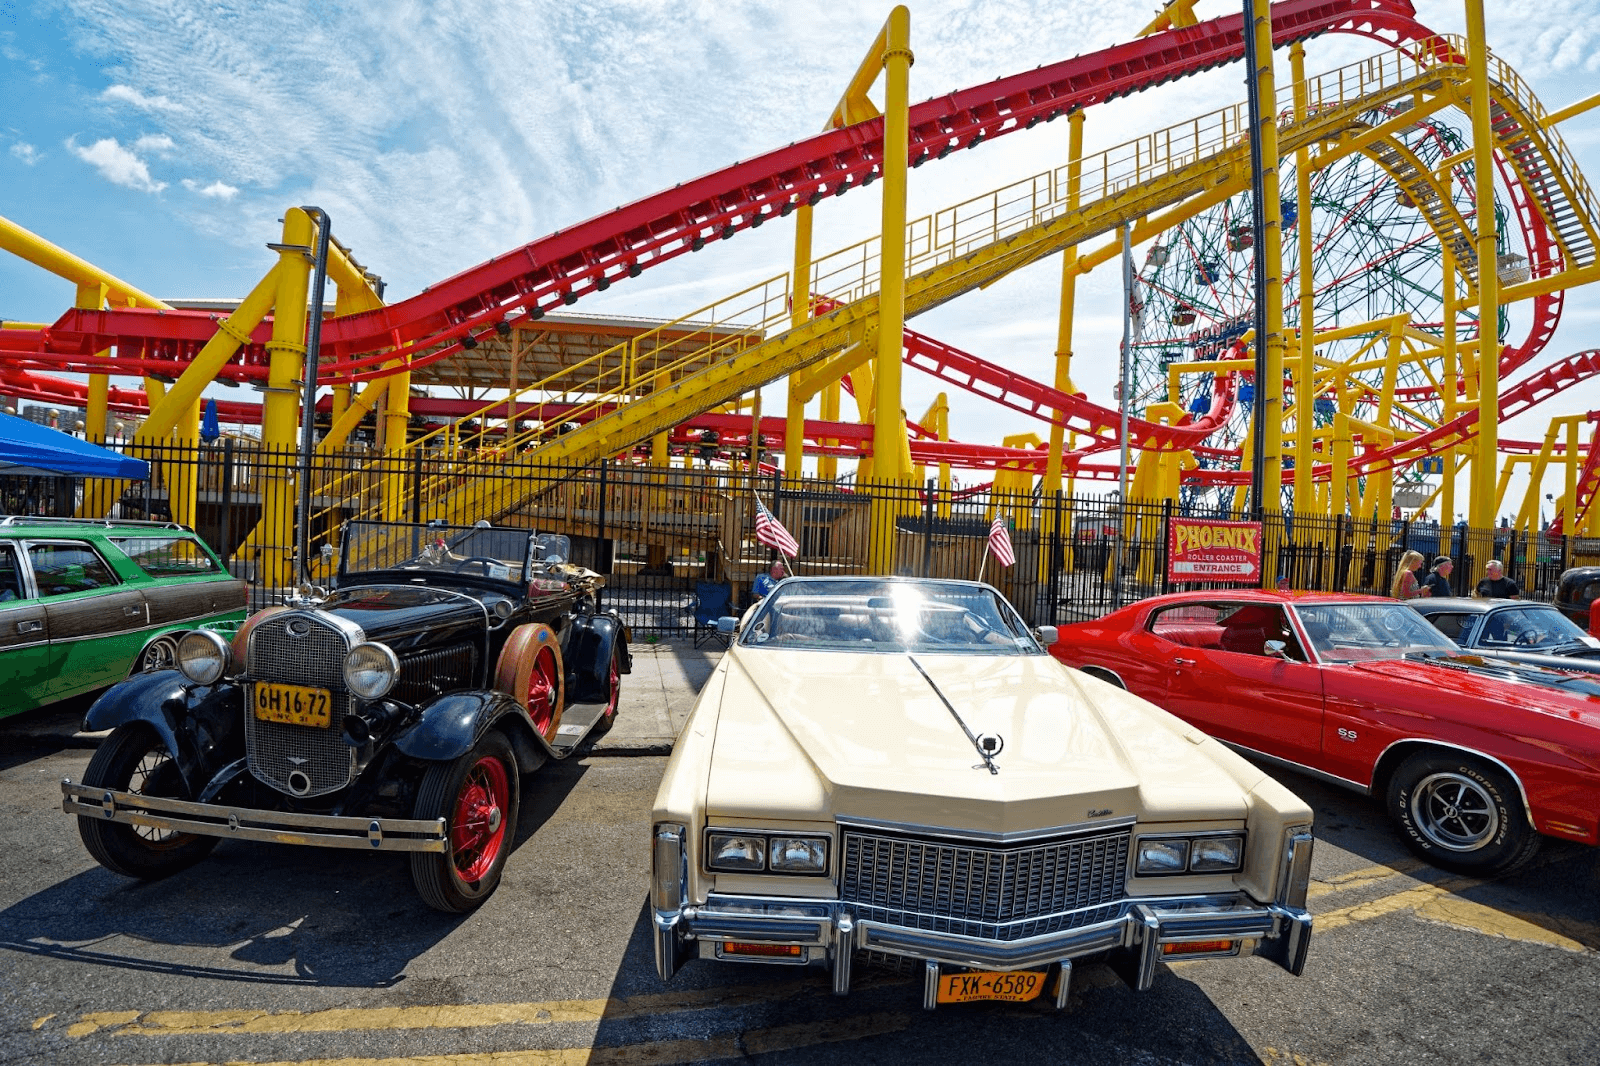 Alliance for Coney Island presents first annual classic car show